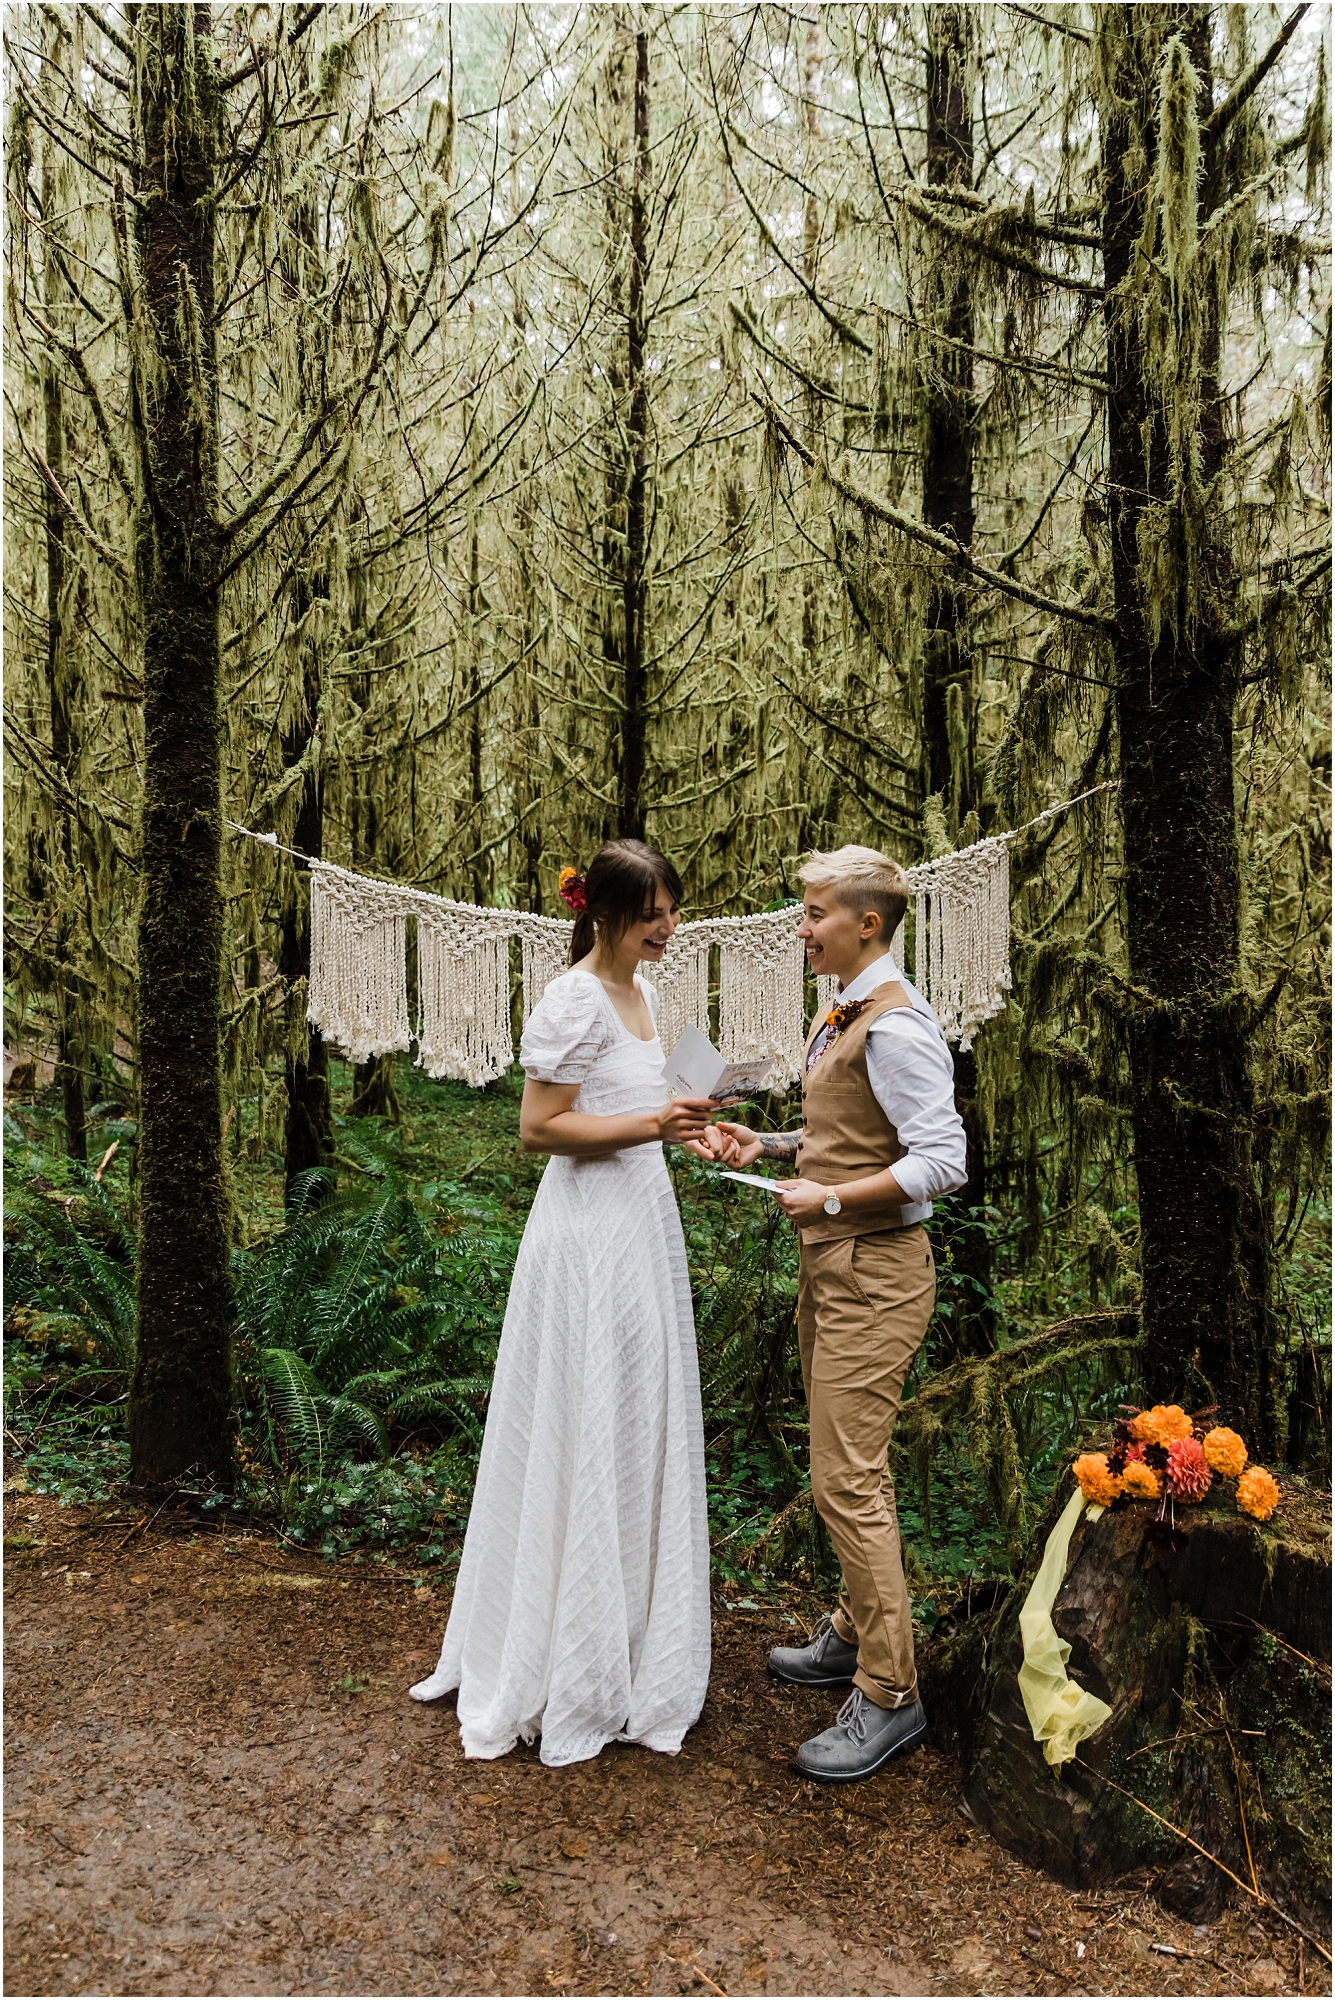 A LGBTQ+ couple shares their wedding vows under the tranquil forest during their PNW hiking adventure elopement in Oregon. | Erica Swantek Photography